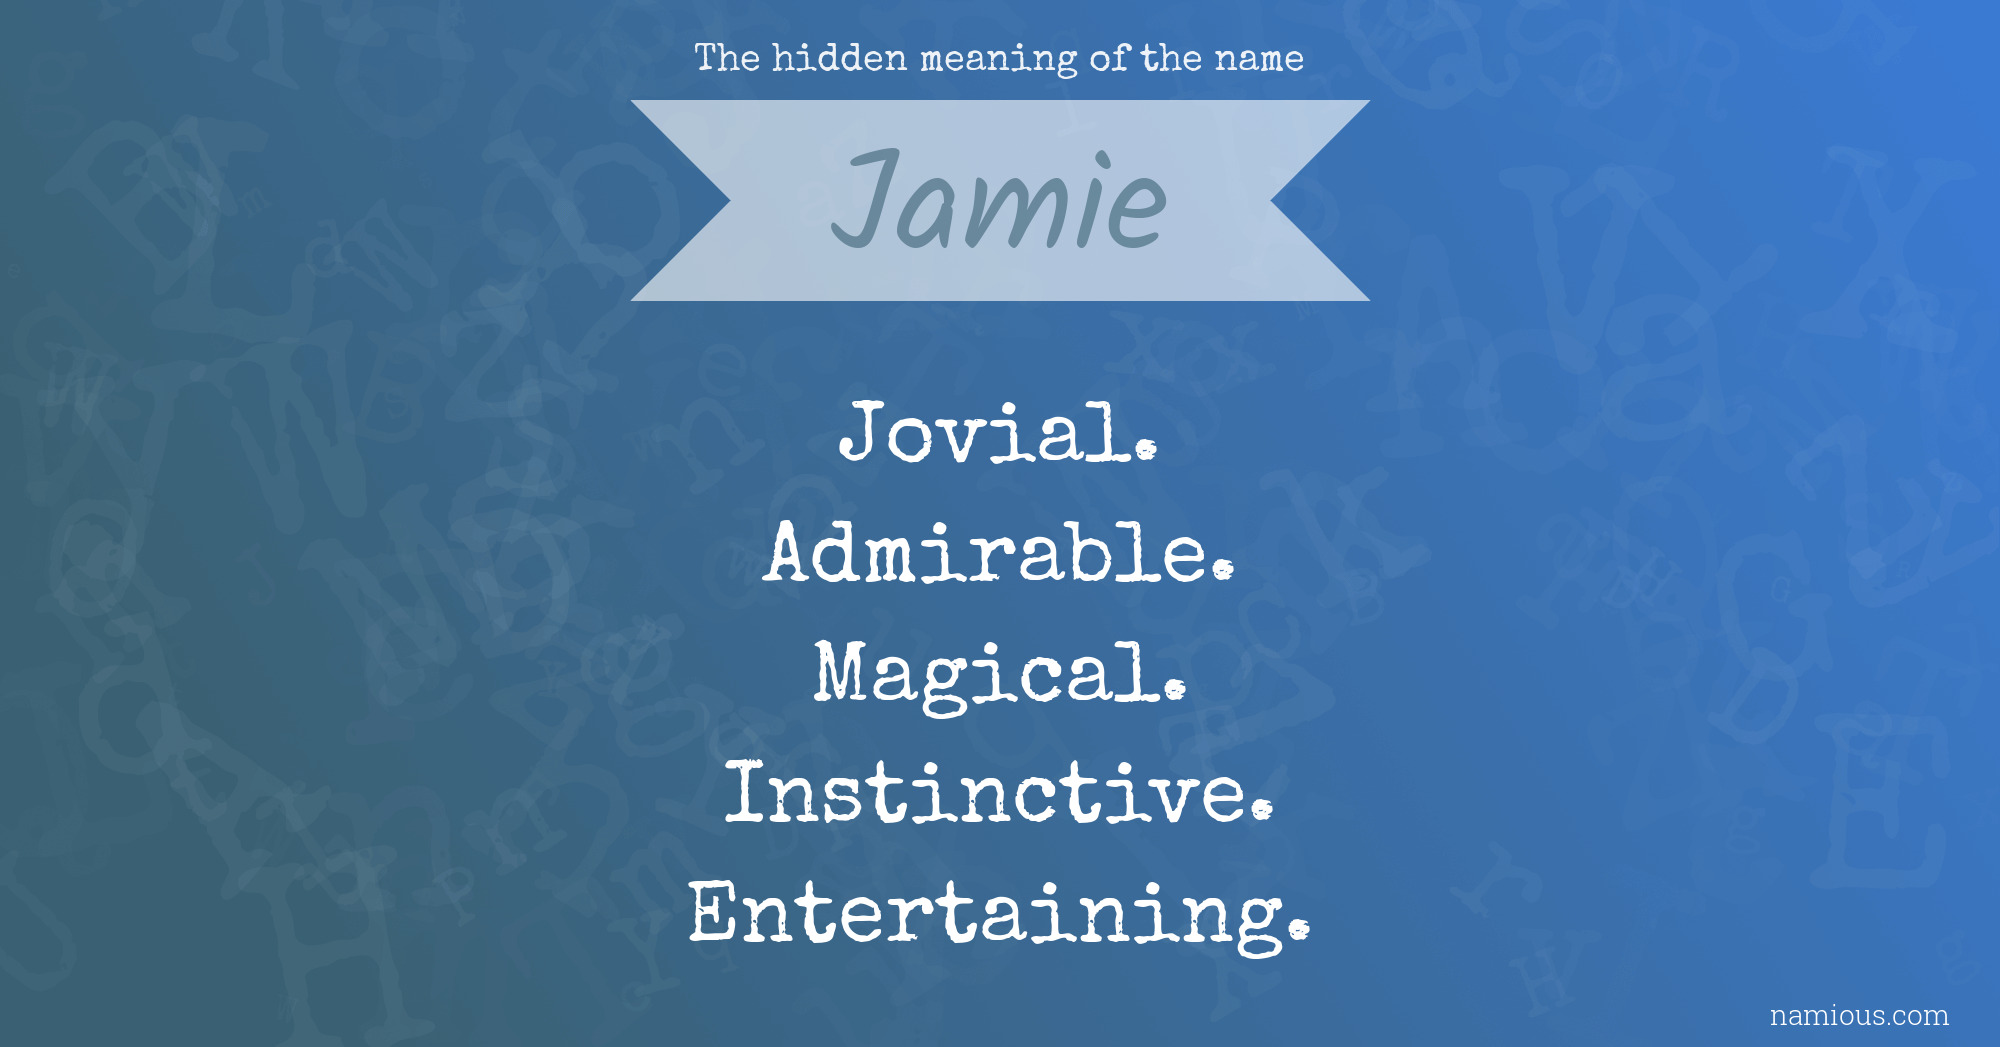 The hidden meaning of the name Jamie